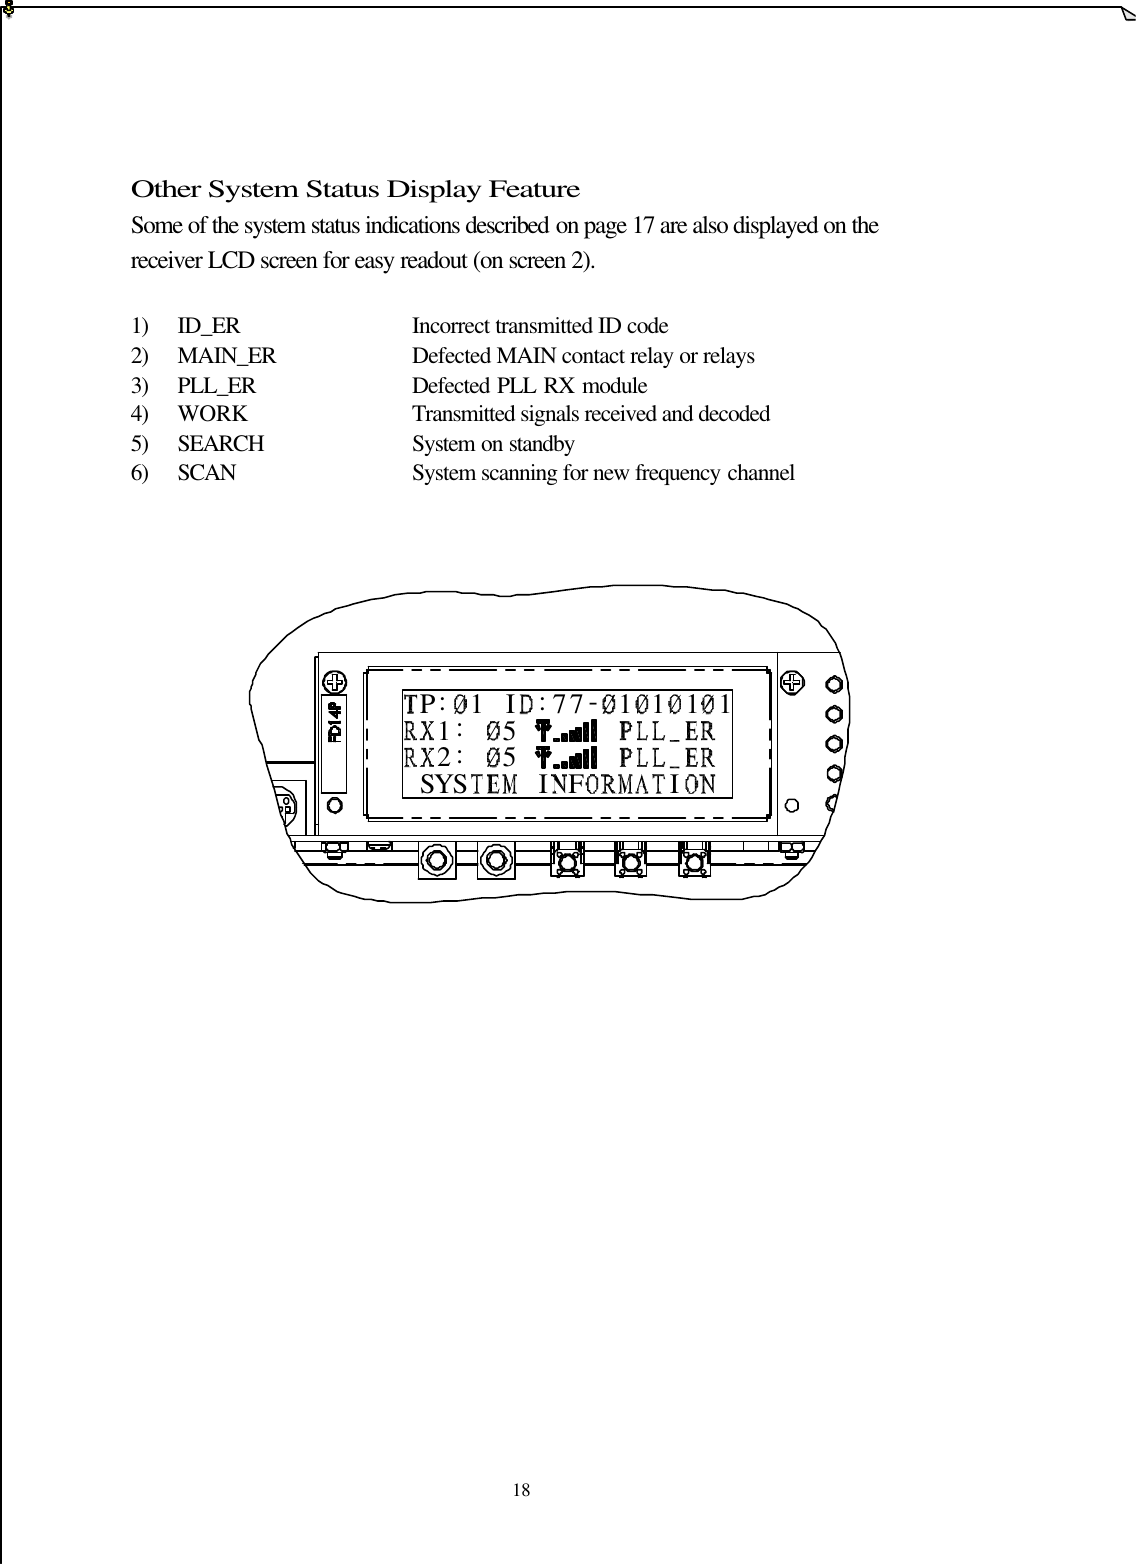   18 YS S1:F5I2:5P:1I:77 -1 1 1 1I    Other System Status Display Feature   Some of the system status indications described on page 17 are also displayed on the receiver LCD screen for easy readout (on screen 2).  1) ID_ER        Incorrect transmitted ID code 2) MAIN_ER     Defected MAIN contact relay or relays   3) PLL_ER        Defected PLL RX module   4) WORK        Transmitted signals received and decoded 5) SEARCH       System on standby 6) SCAN        System scanning for new frequency channel                               